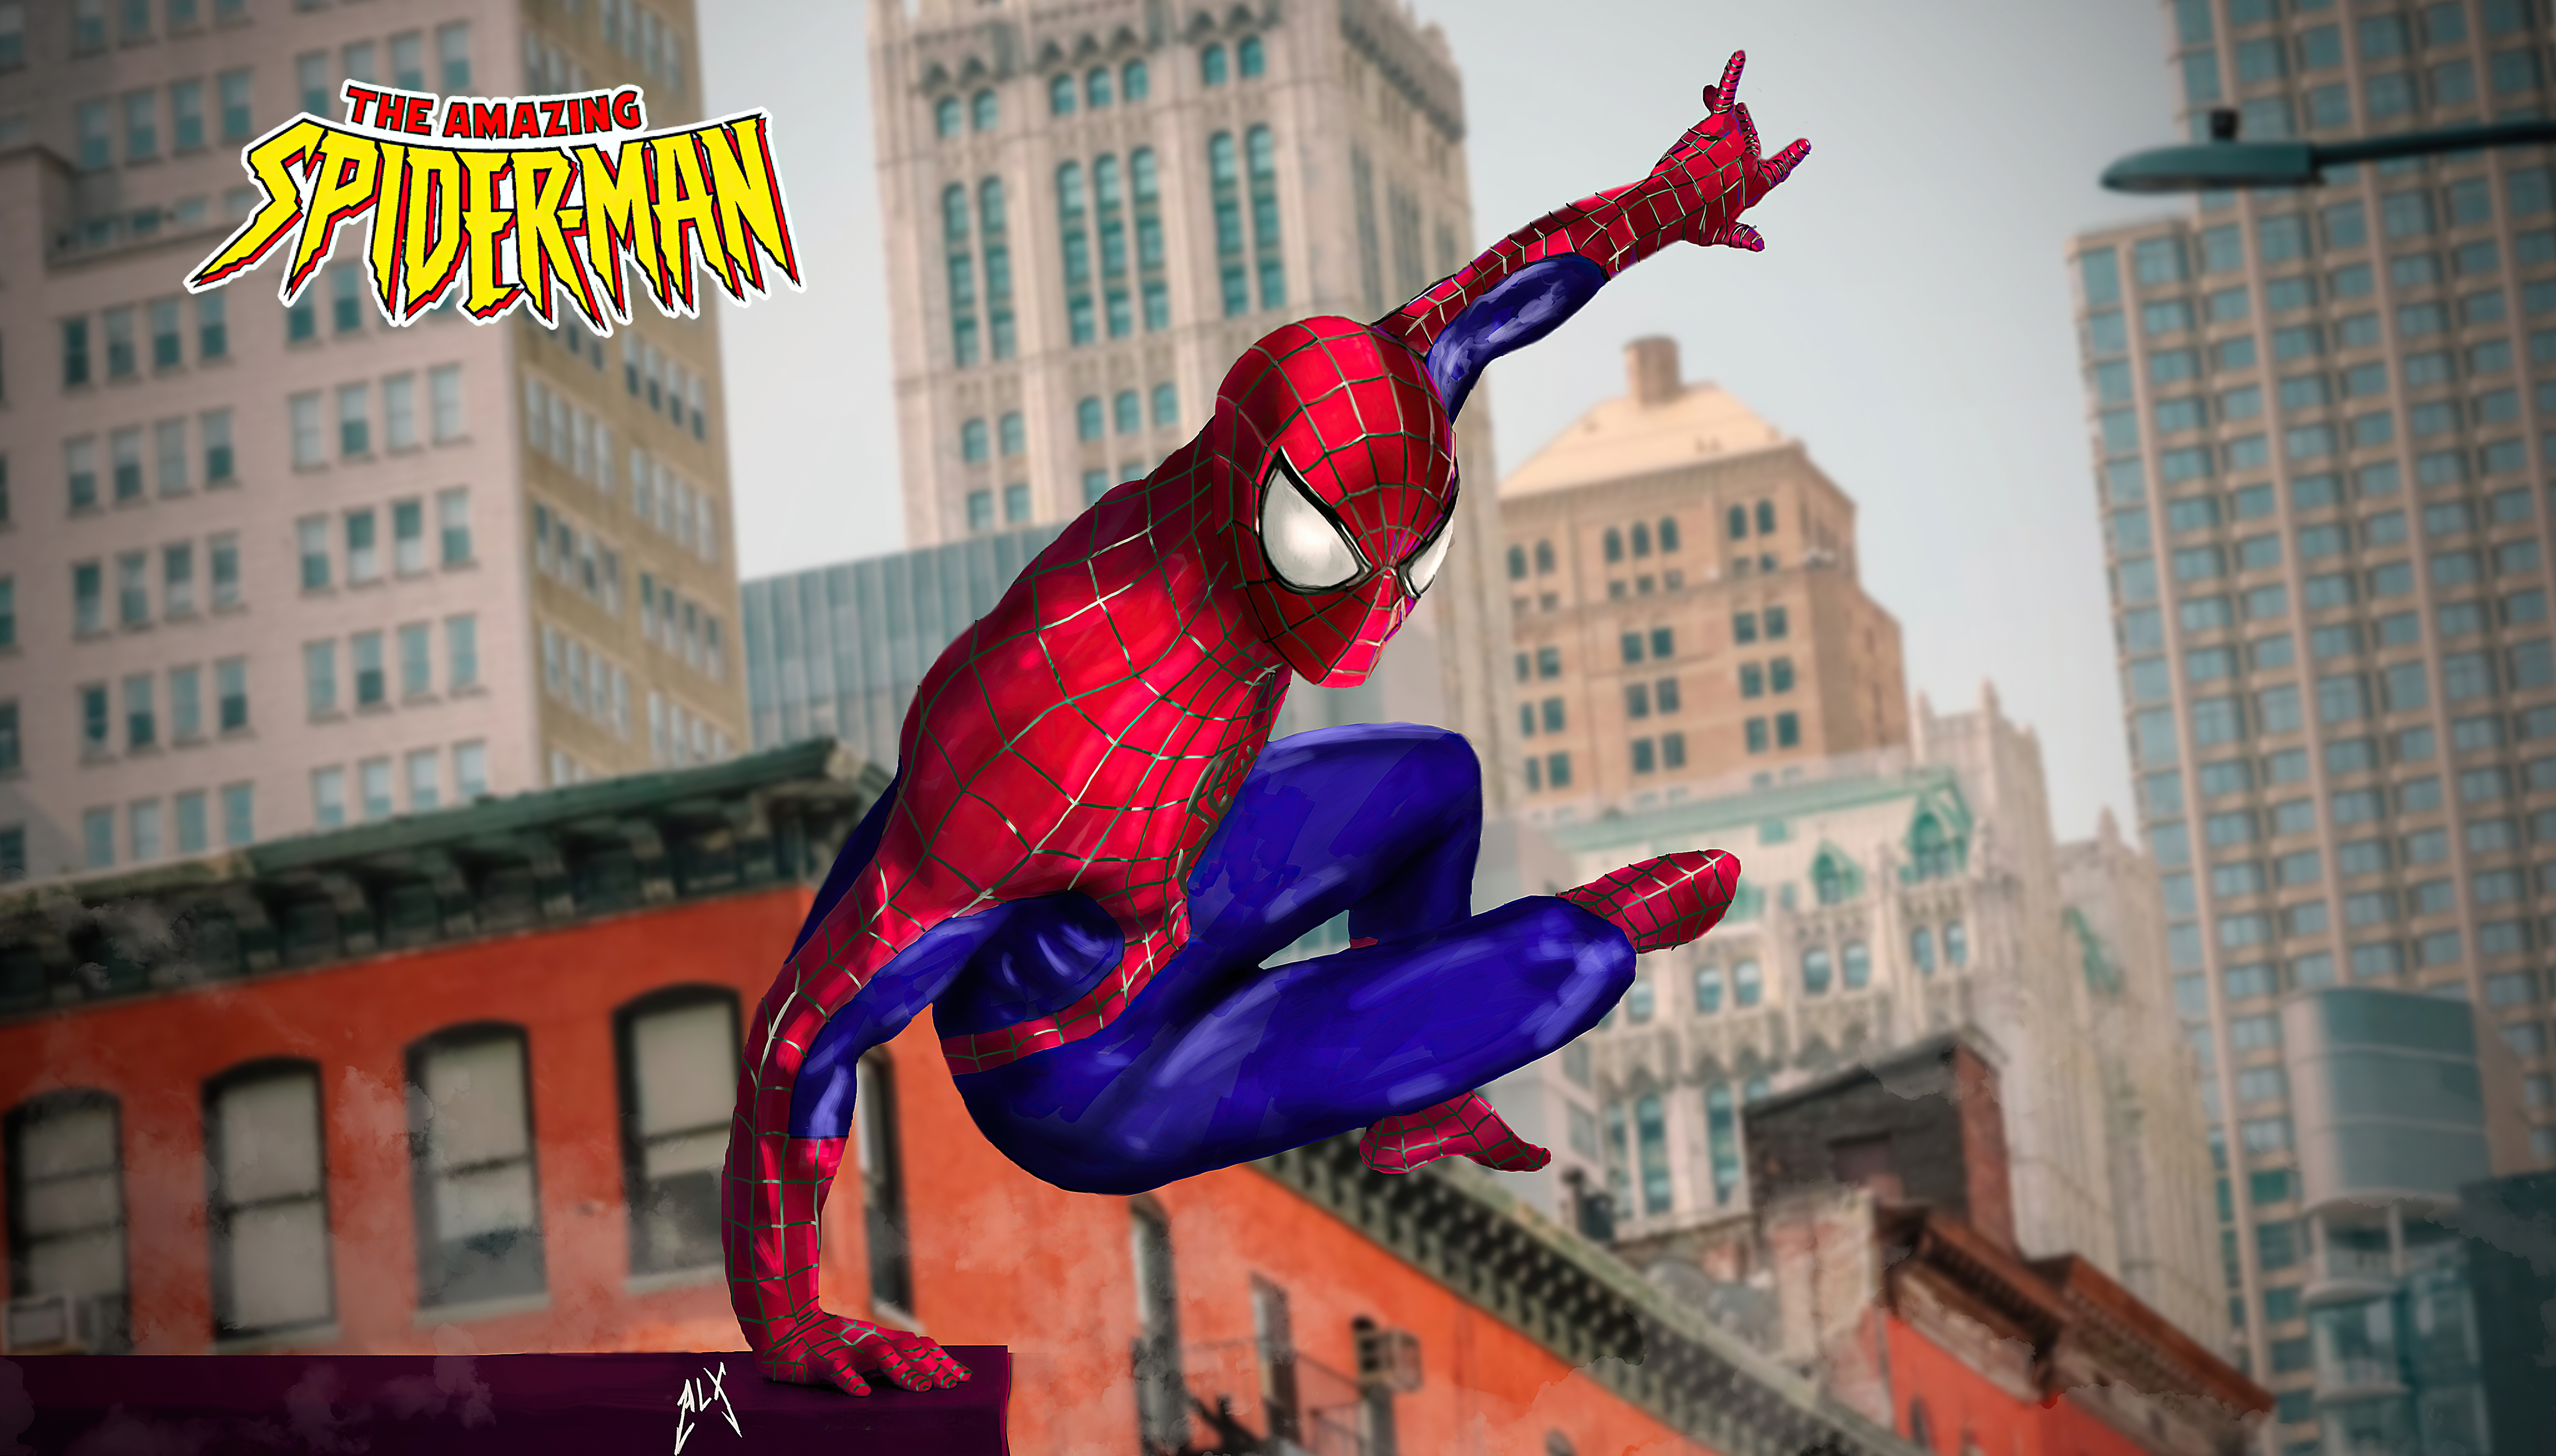 Wallpapers leap spider man costume on the desktop